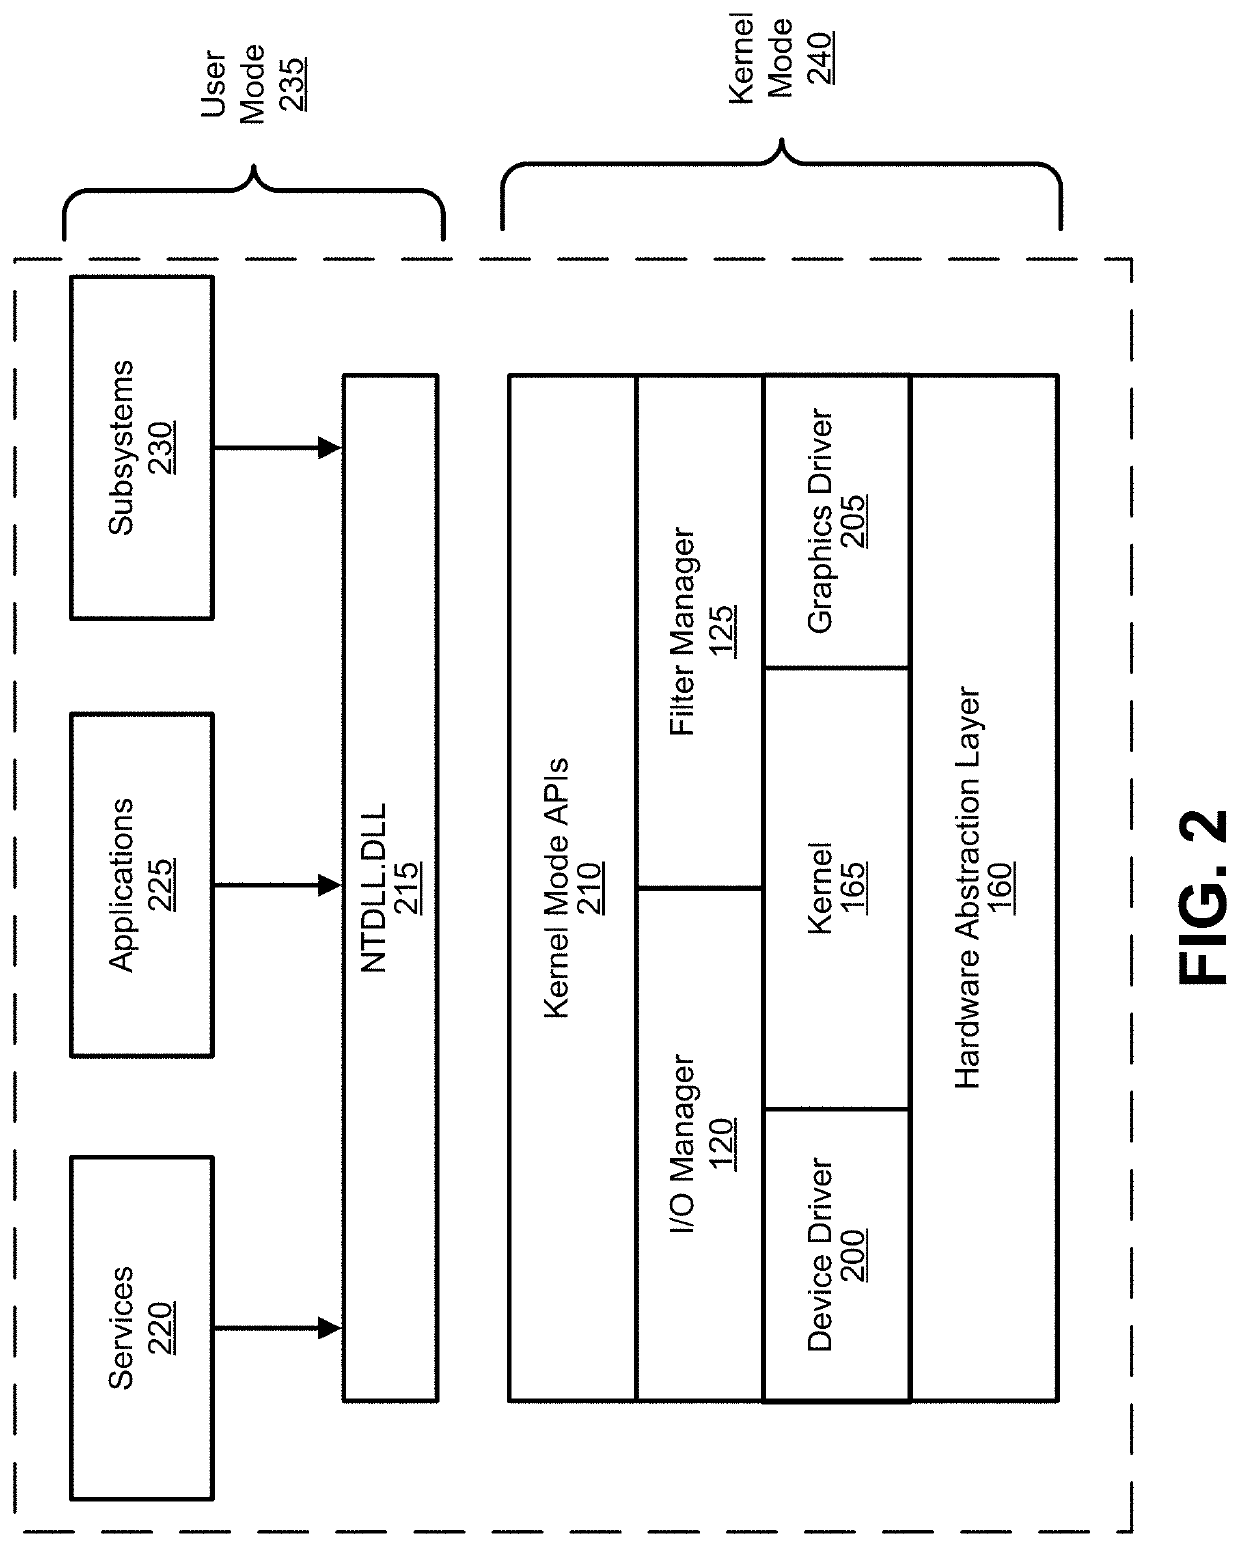 Real-time detection of and protection from malware and steganography in a kernel mode